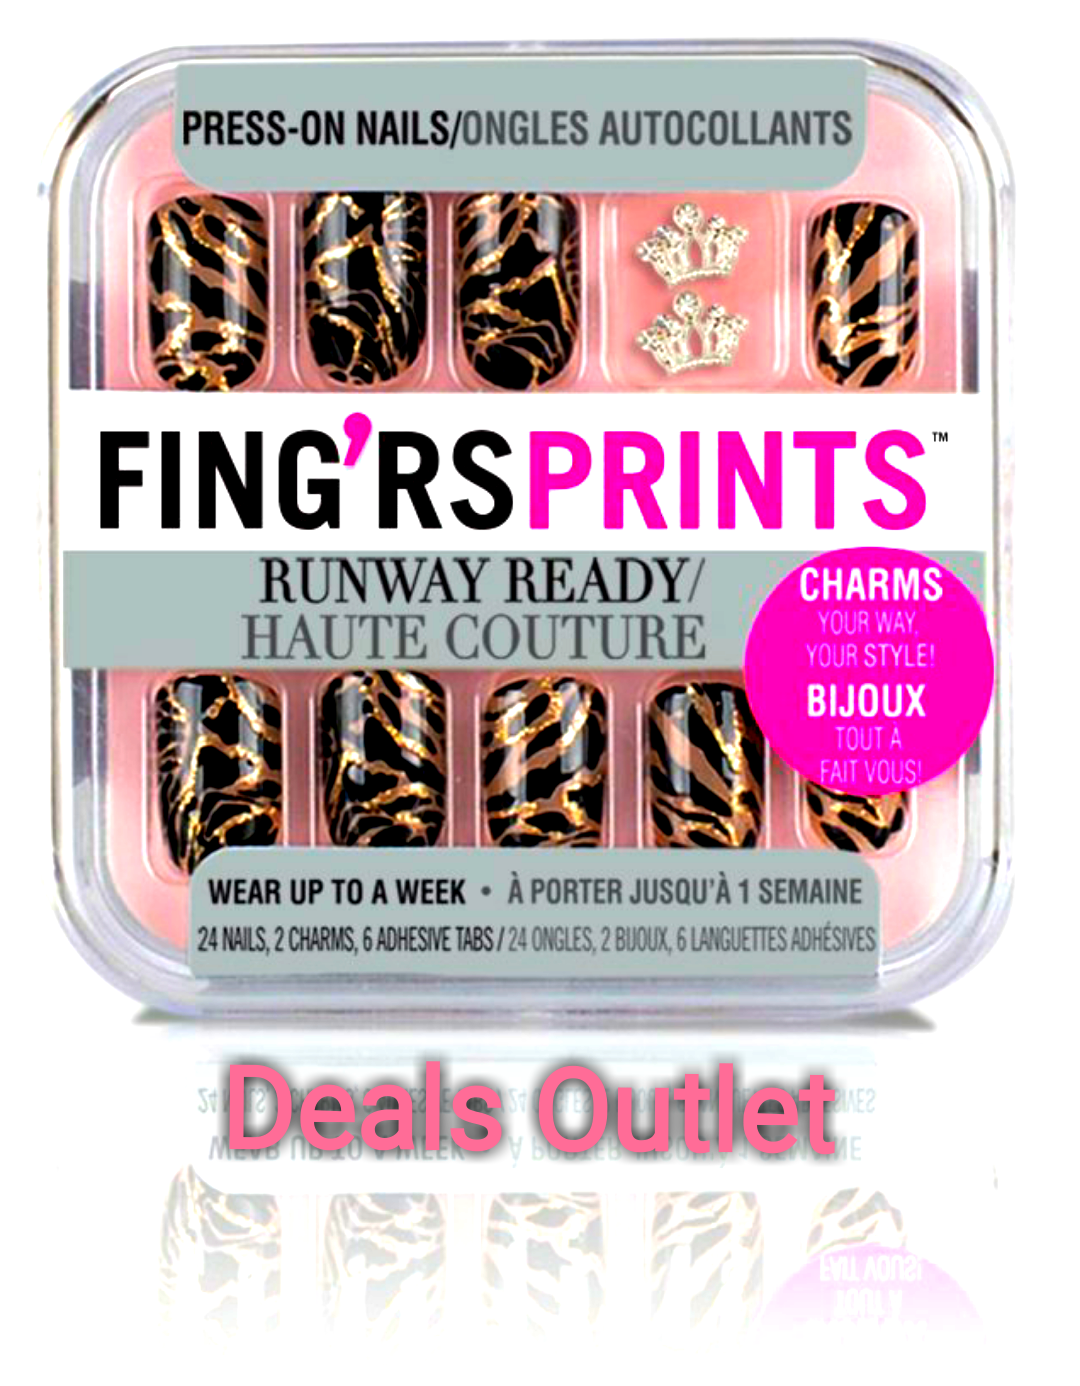 Fing'rs Prints Runway Ready Press-On Nails Show Stopper 26 count